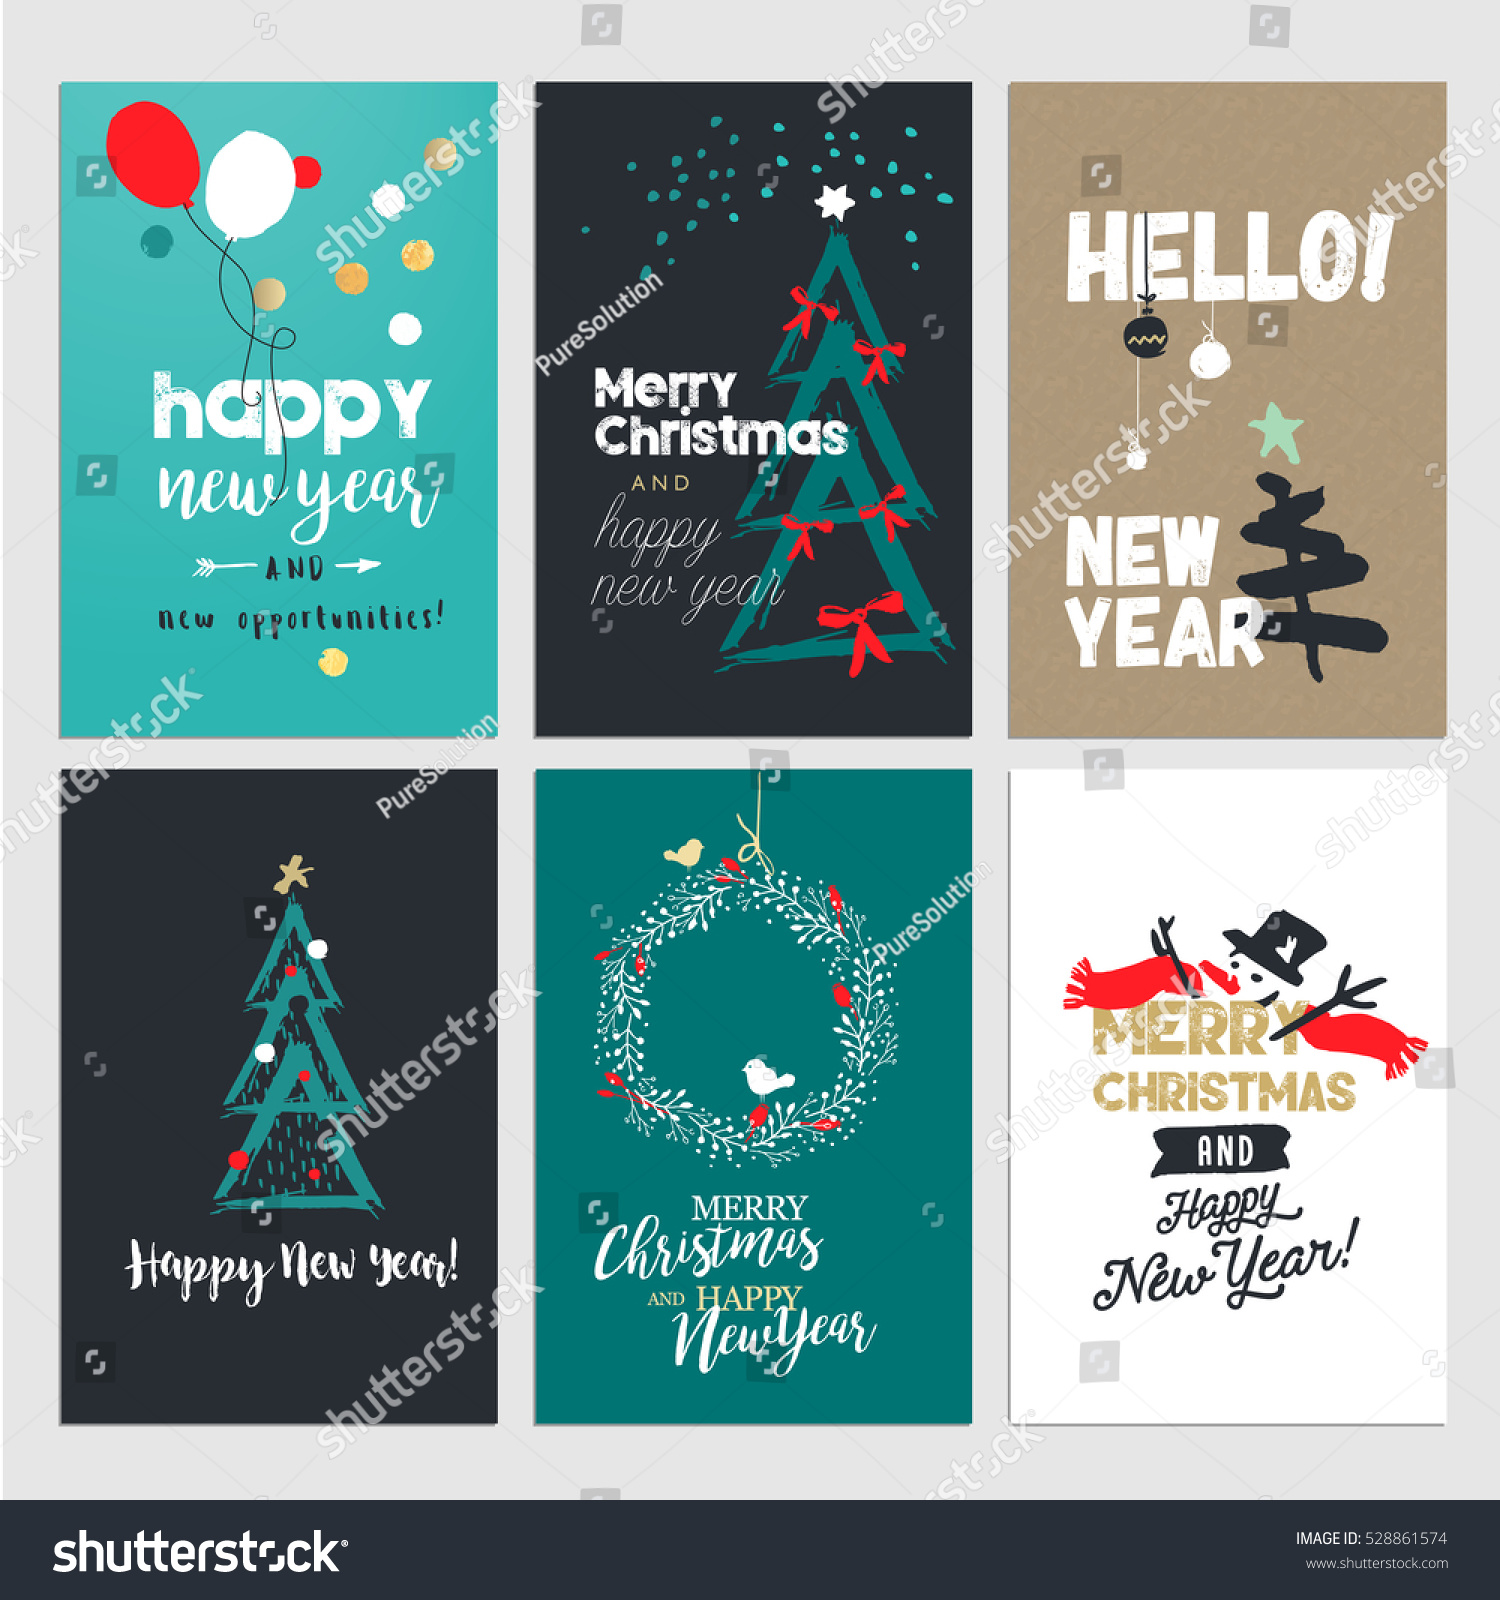 Christmas and New year greeting card concepts Set od flat design vector illustrations for greeting